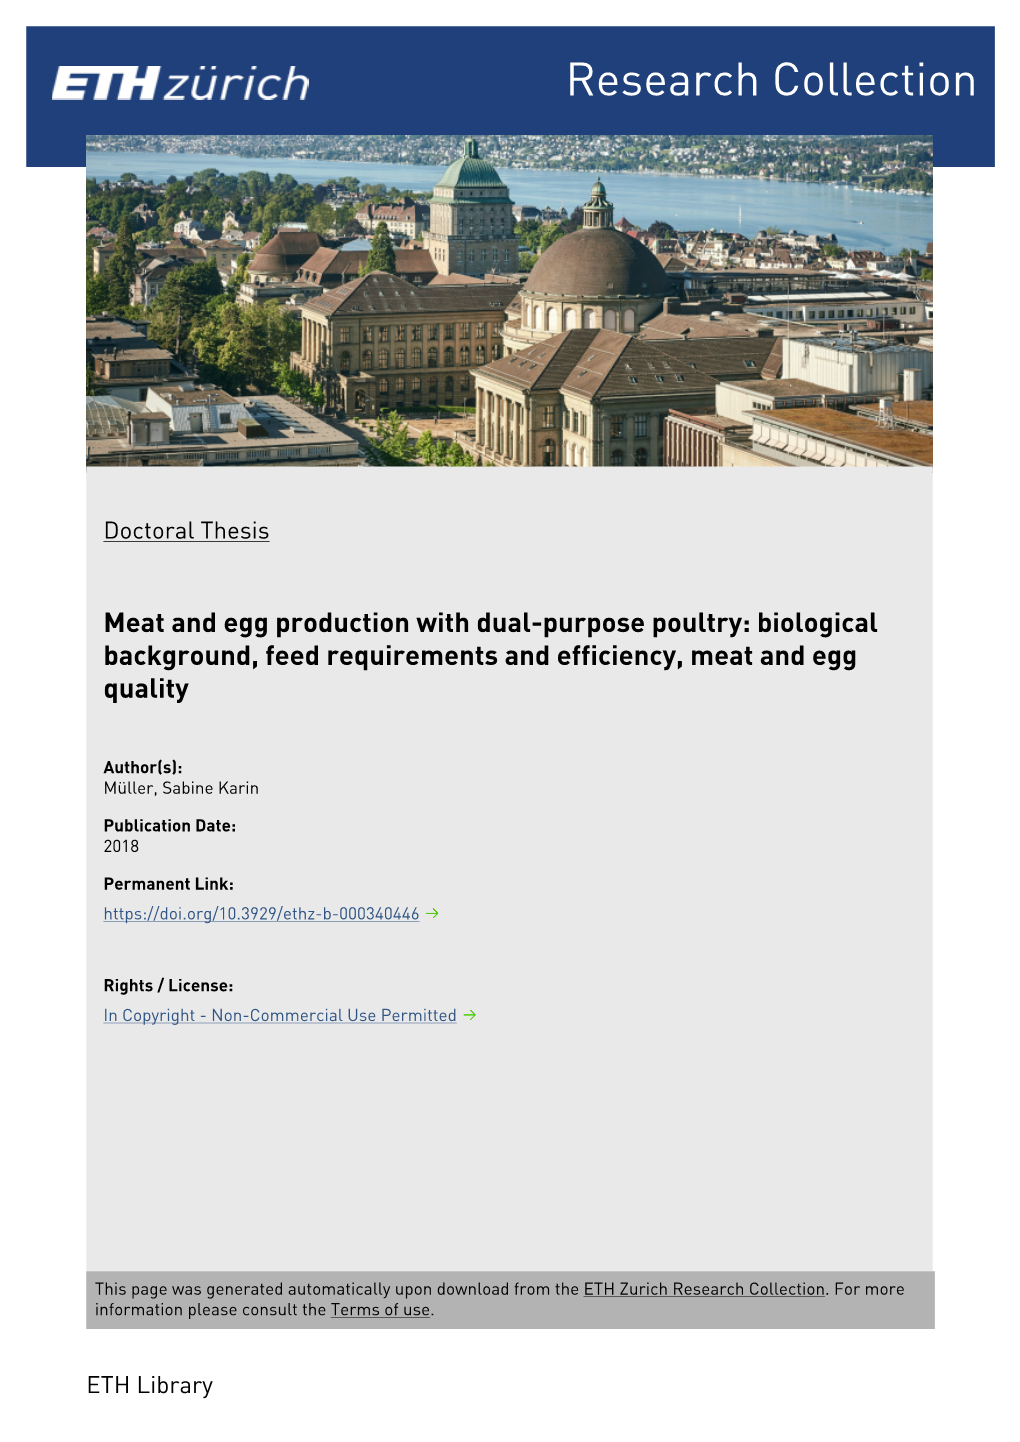 Meat and Egg Production with Dual-Purpose Poultry: Biological Background, Feed Requirements and Efficiency, Meat and Egg Quality